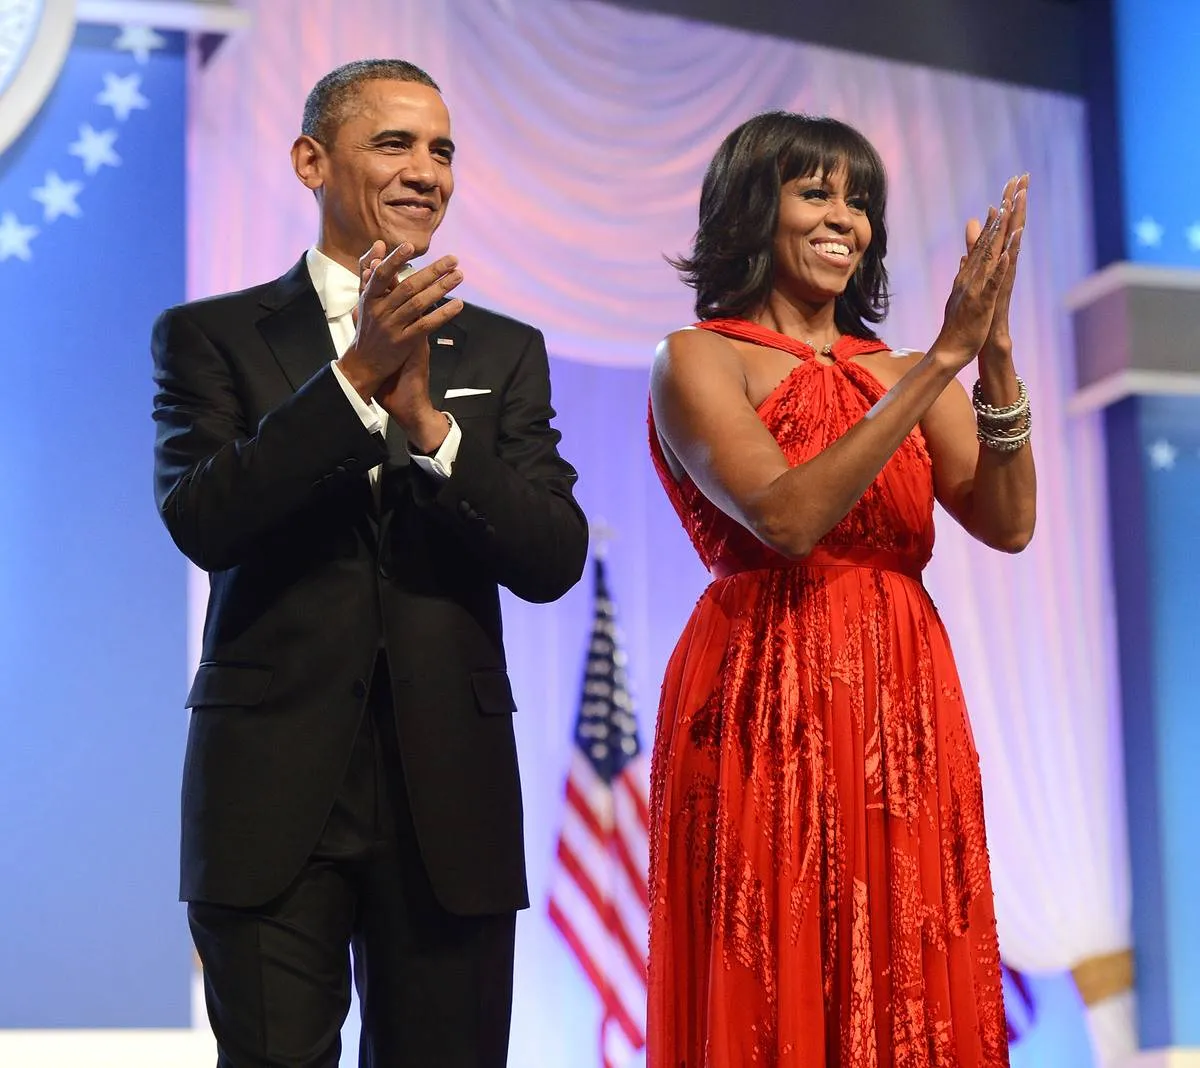 Barack Obama and first lady Michelle Obama arrive together for the 2013 Inaugural Ball.